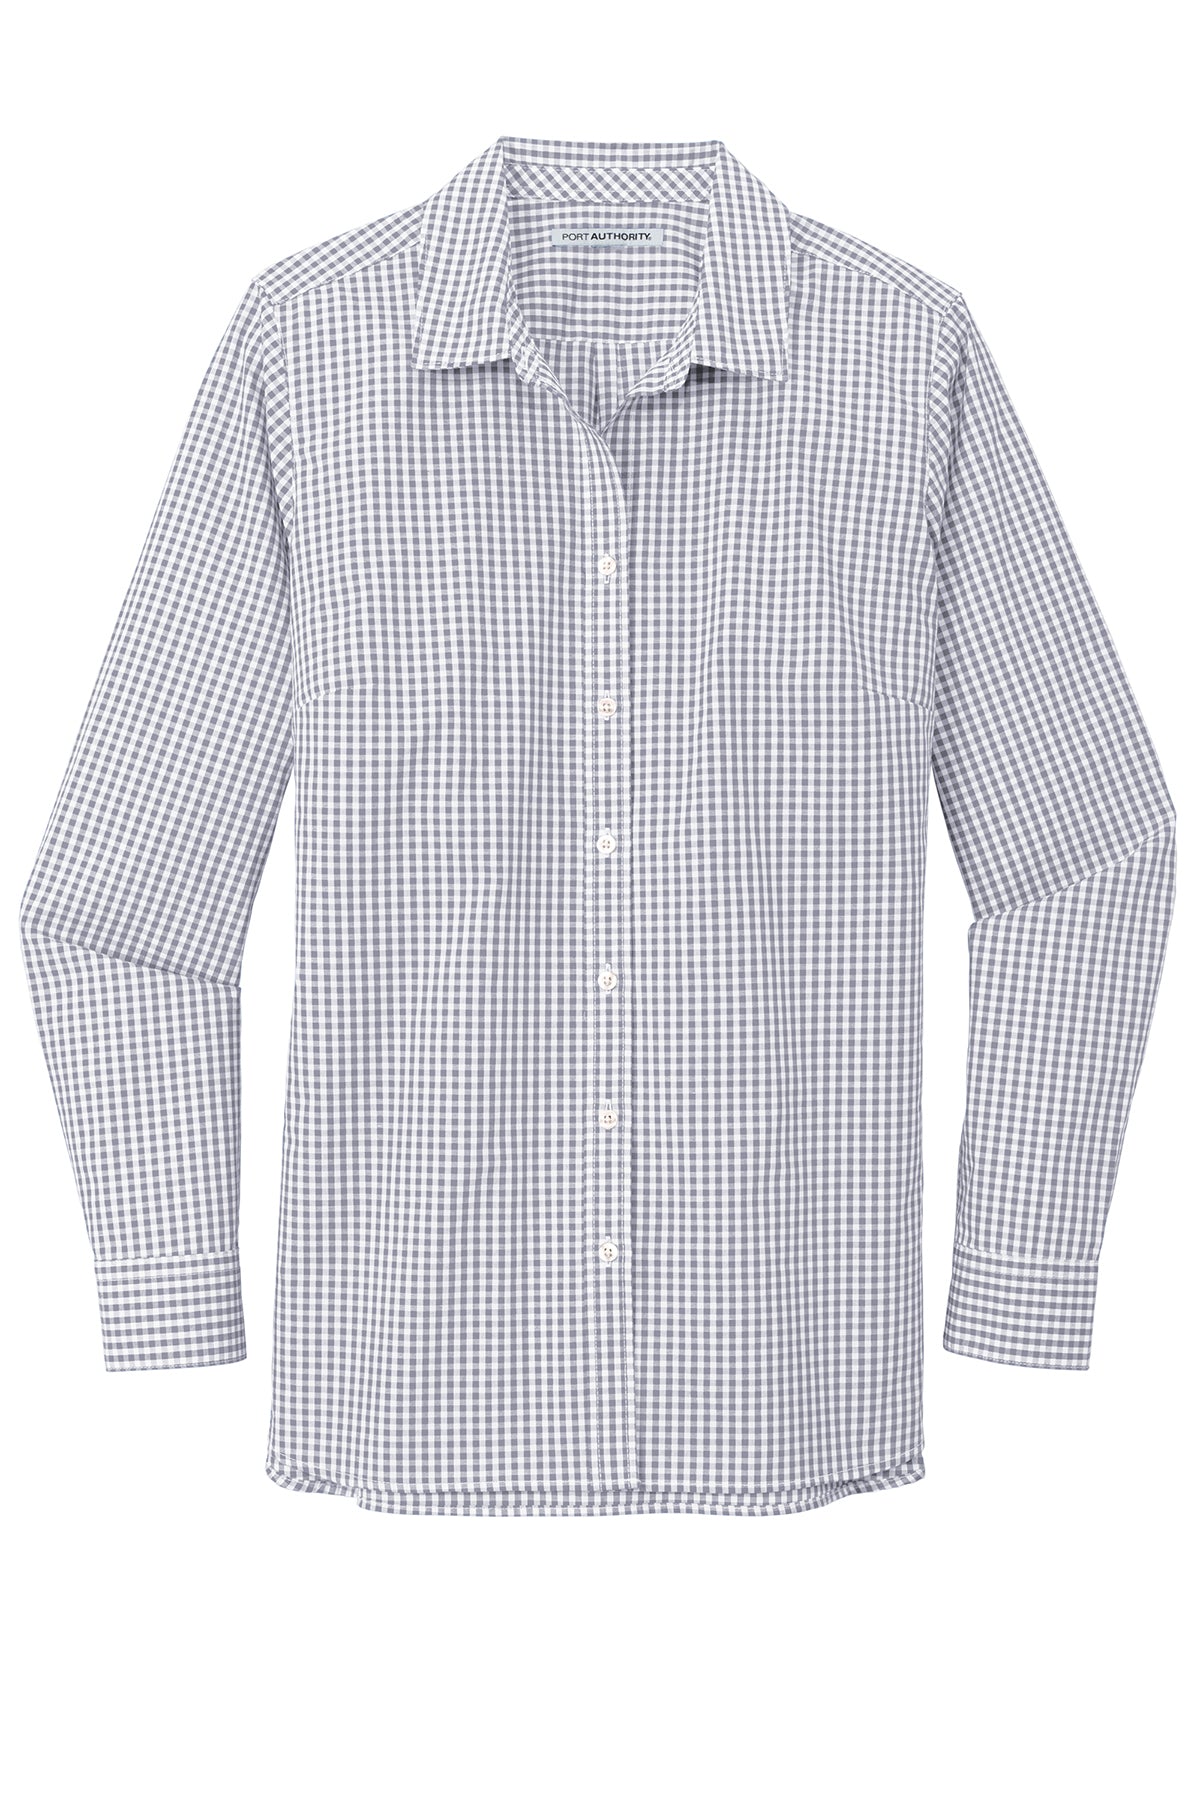 HBPC Port Authority ® Ladies Broadcloth Gingham Easy Care Shirt LW644